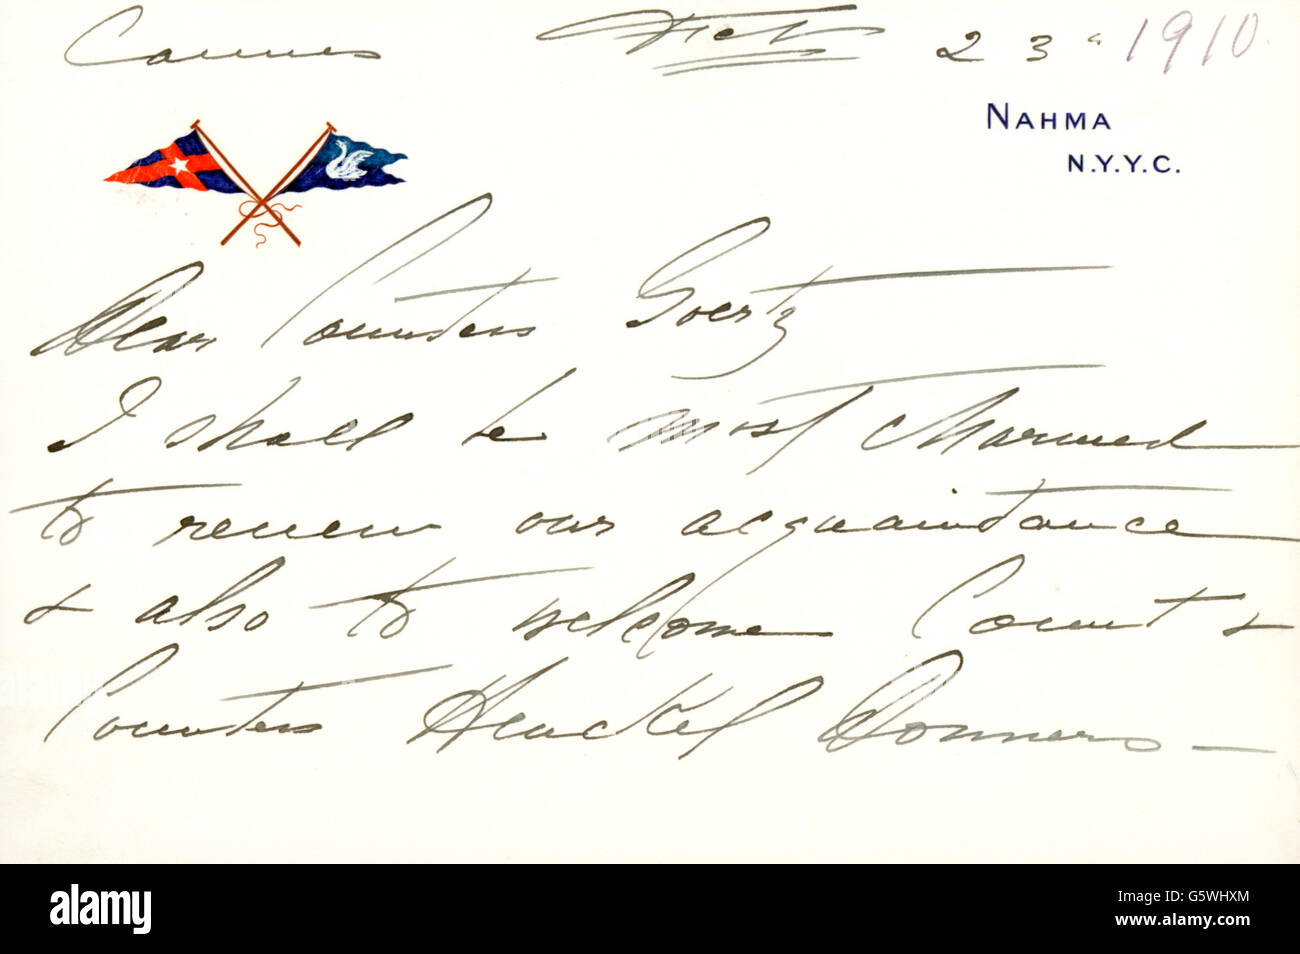 Goelet, Robert, 29.9.1841 - 27.4.1899, American businessman, invitation card of his wife Henrietta to the countess Goertz for a visit on her yacht 'Nahma', Cannes, 23.2.1910, Stock Photo